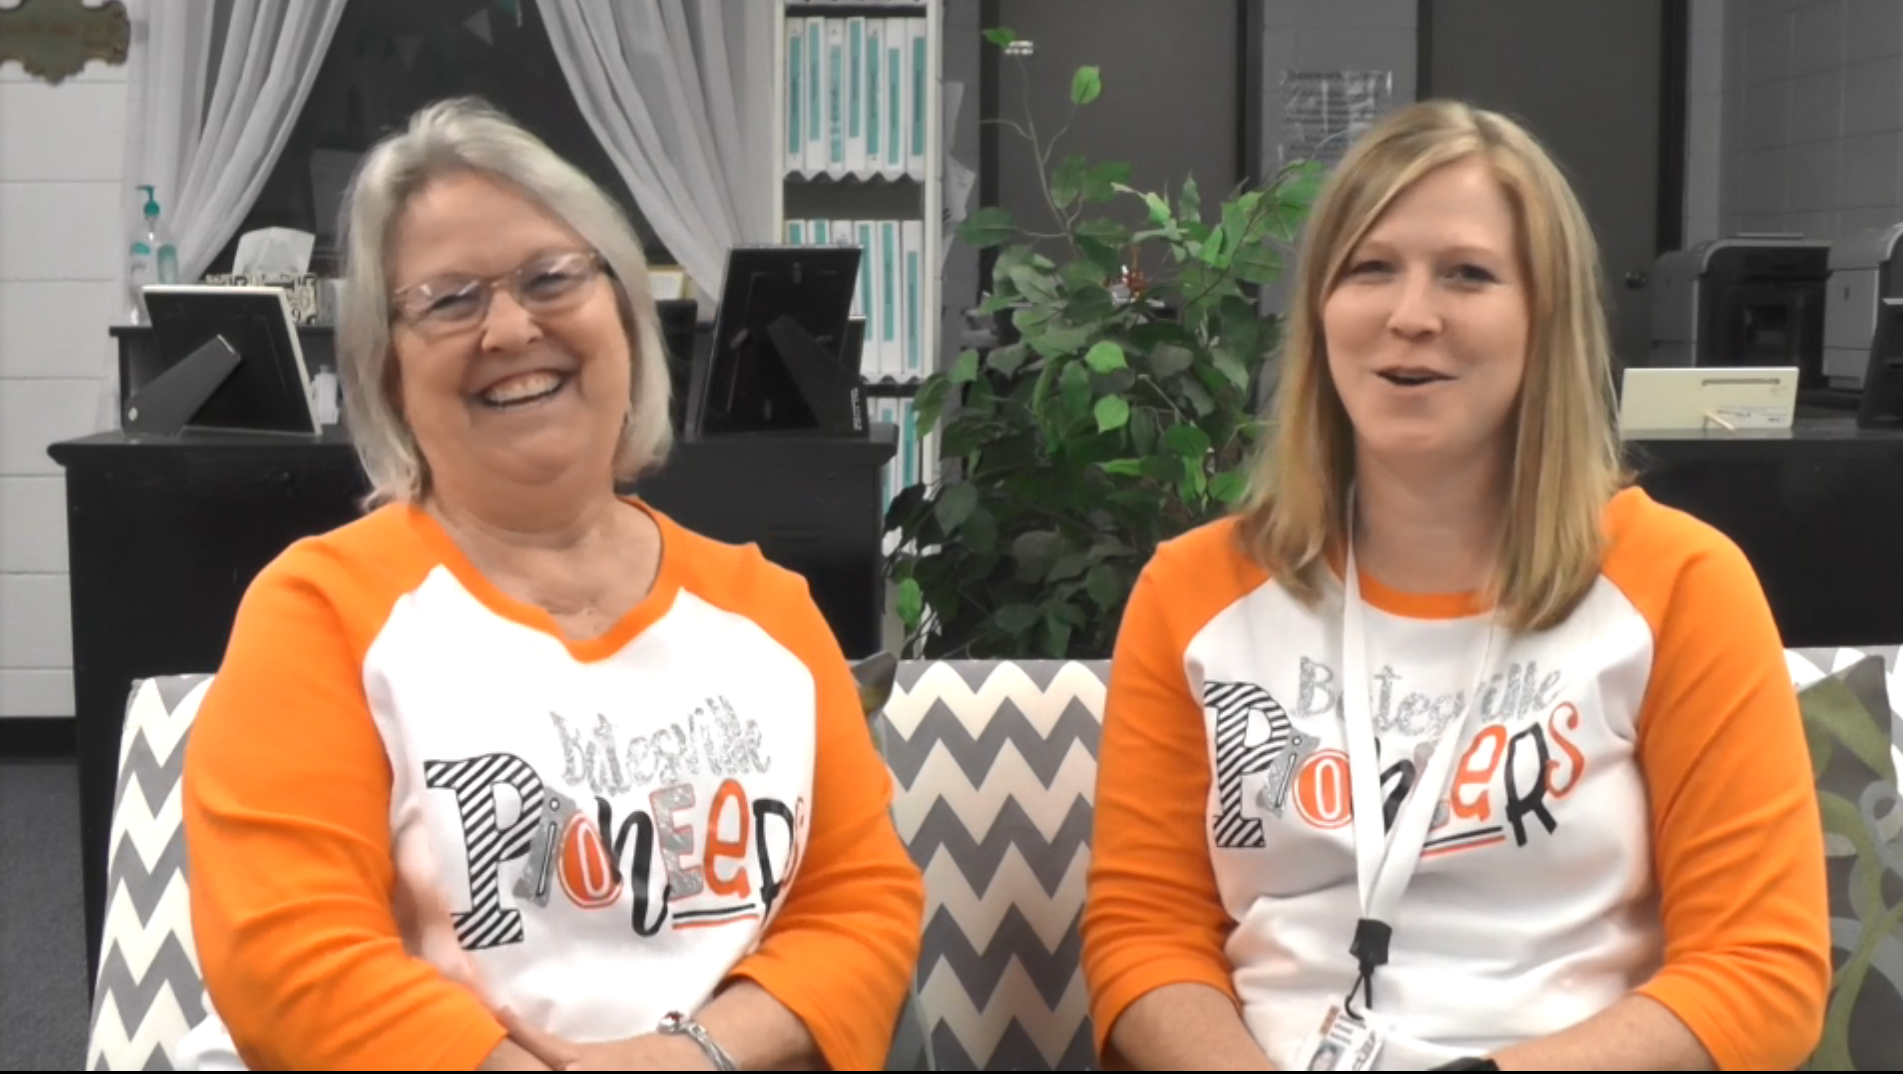 Two women, a mother and daughter, wear orange and white t-shirts and sit on a couch with gray, zigzag stripes.